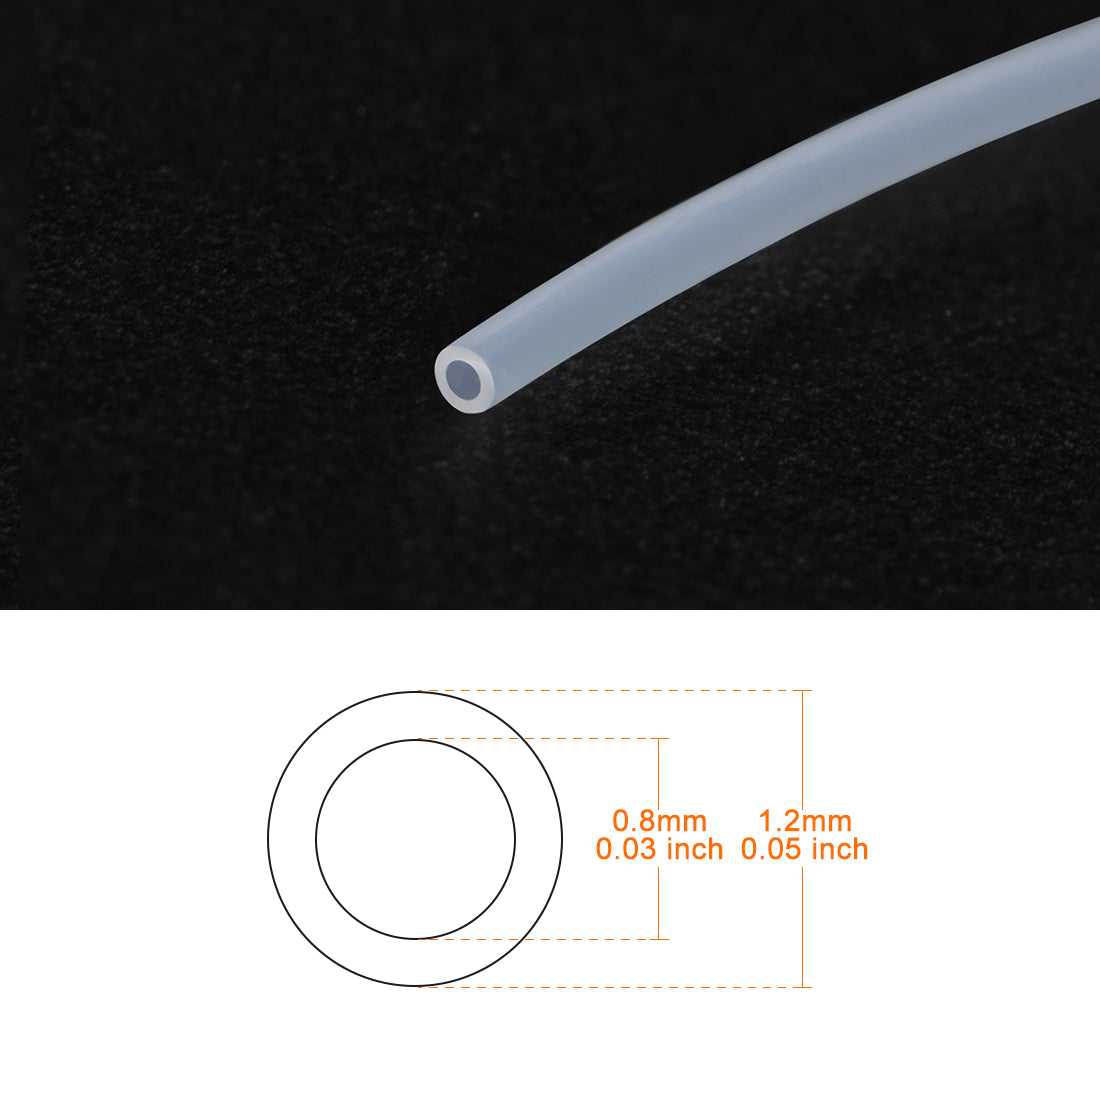 uxcell Uxcell PTFE Tube Tubing 2 Meter 6.56ft Lengh Pipe 0.8mm ID 1.2mm OD for 3D Printer RepRap